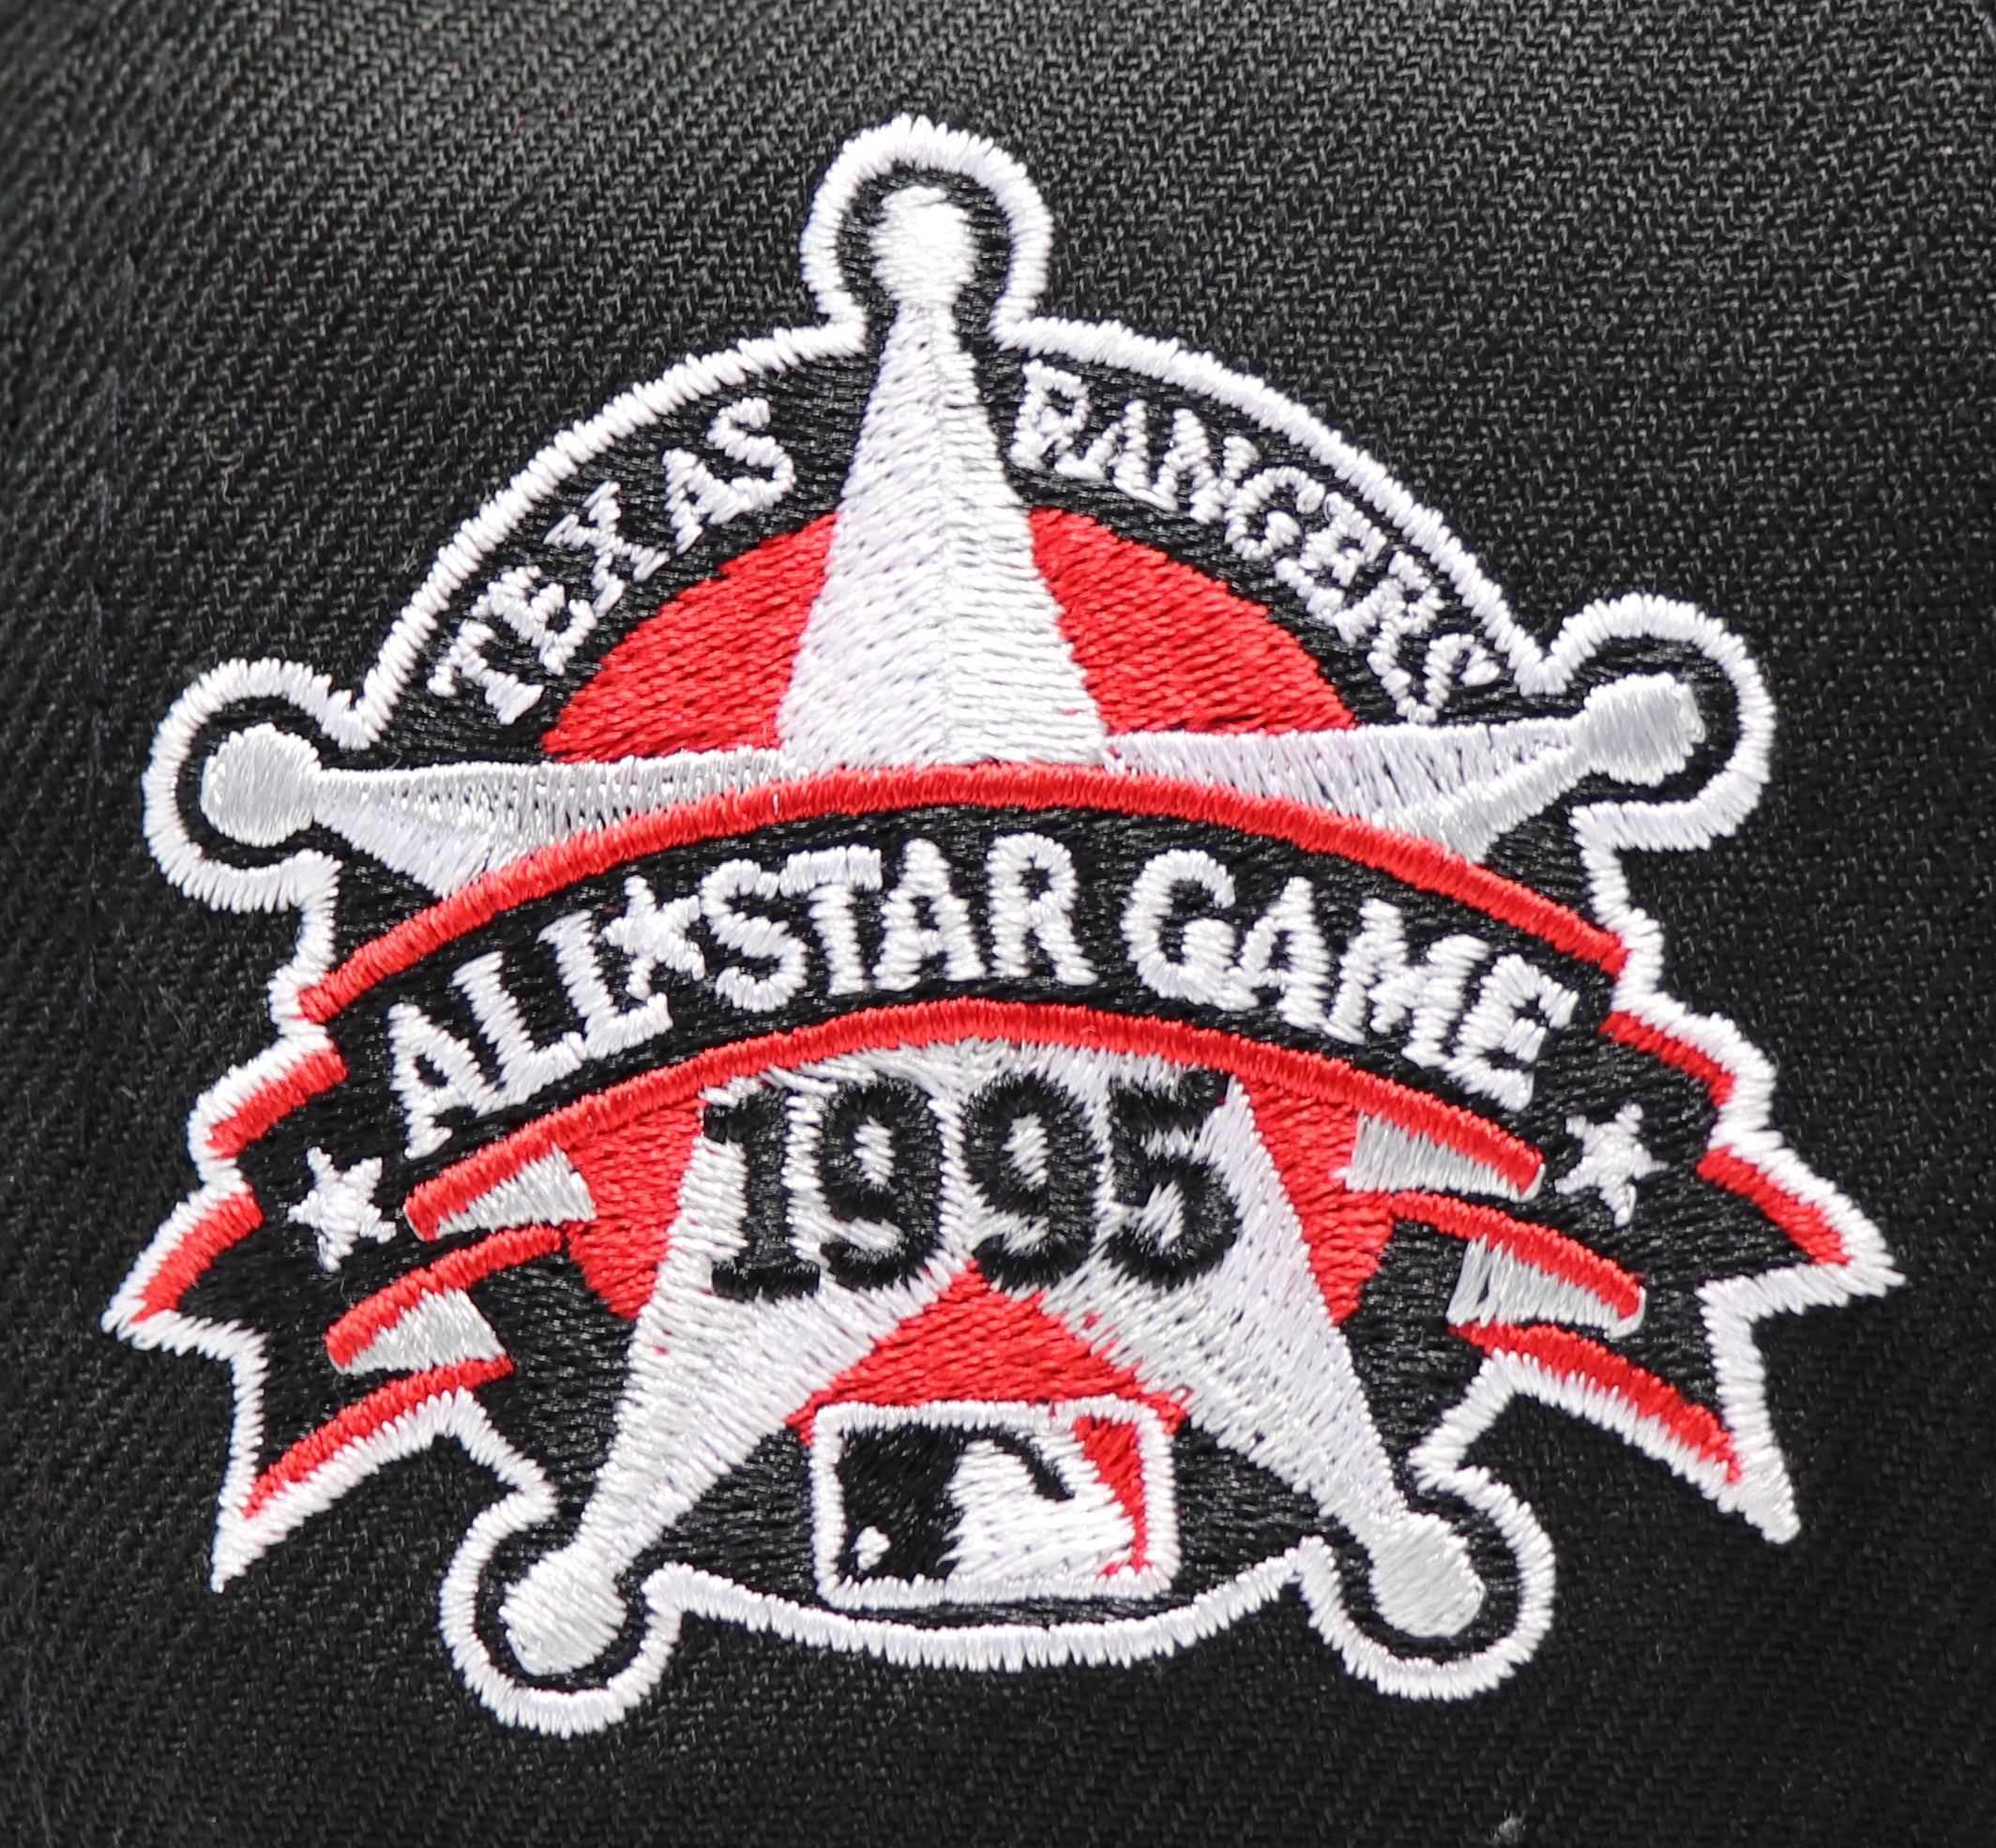 TEXAS RANGERS (1995 ALLSTARGAME) NEWERA 59FIFTY FITTED (RED UNDER VISOR)